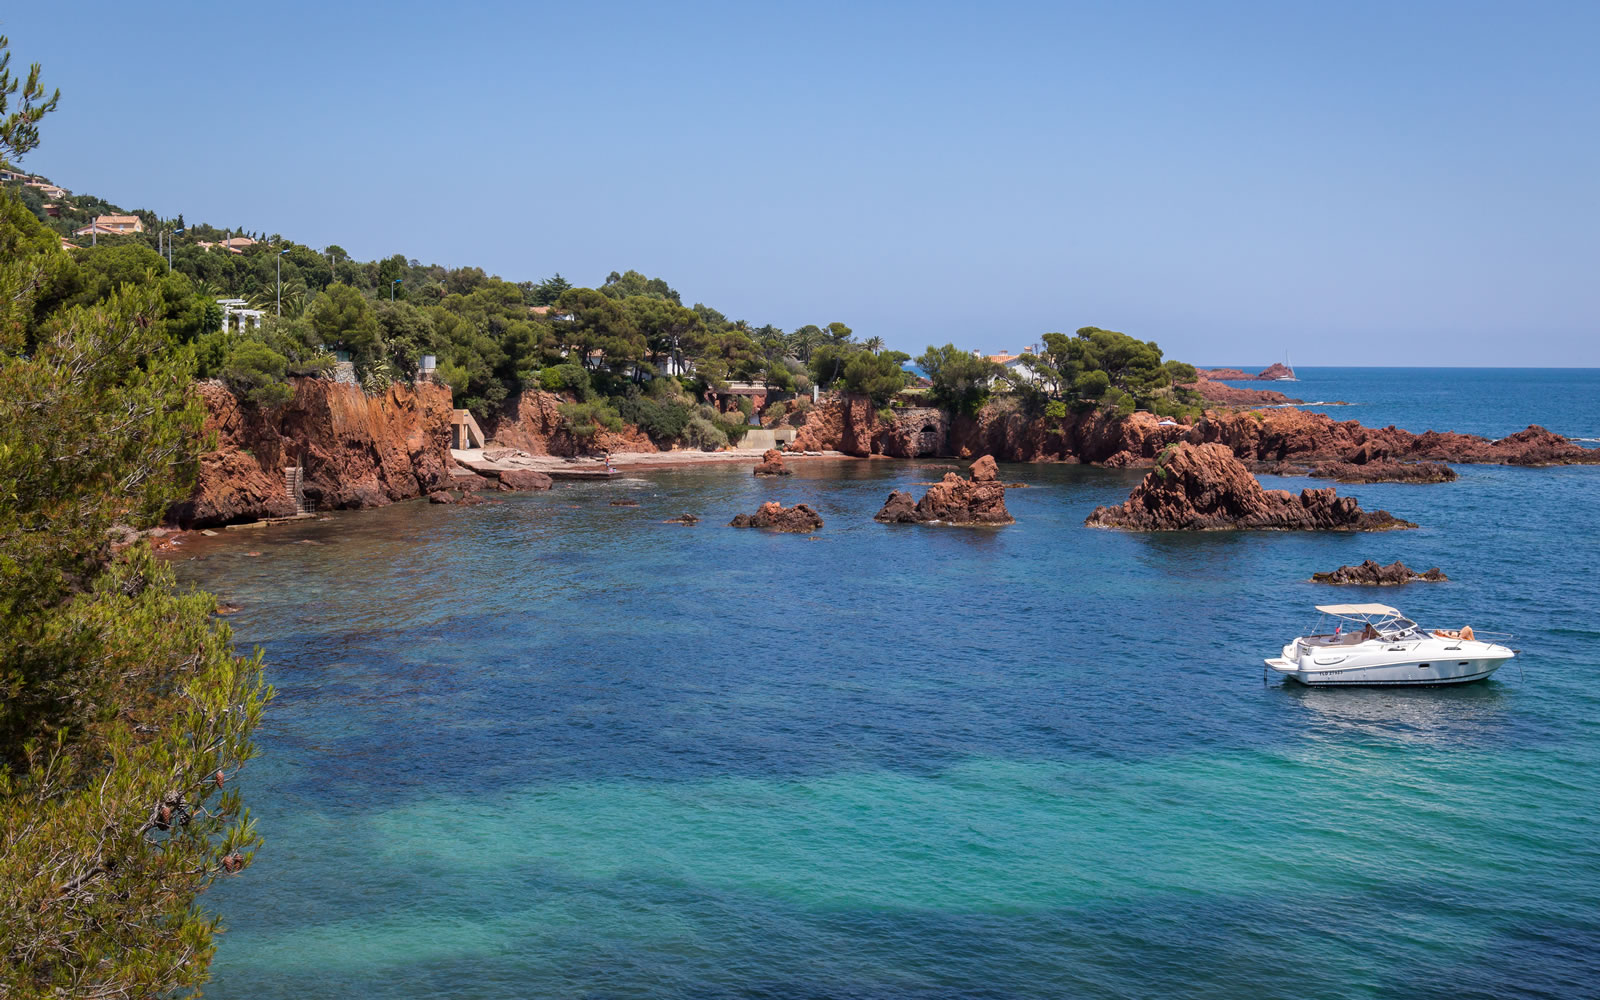 What to do in Saint Raphael